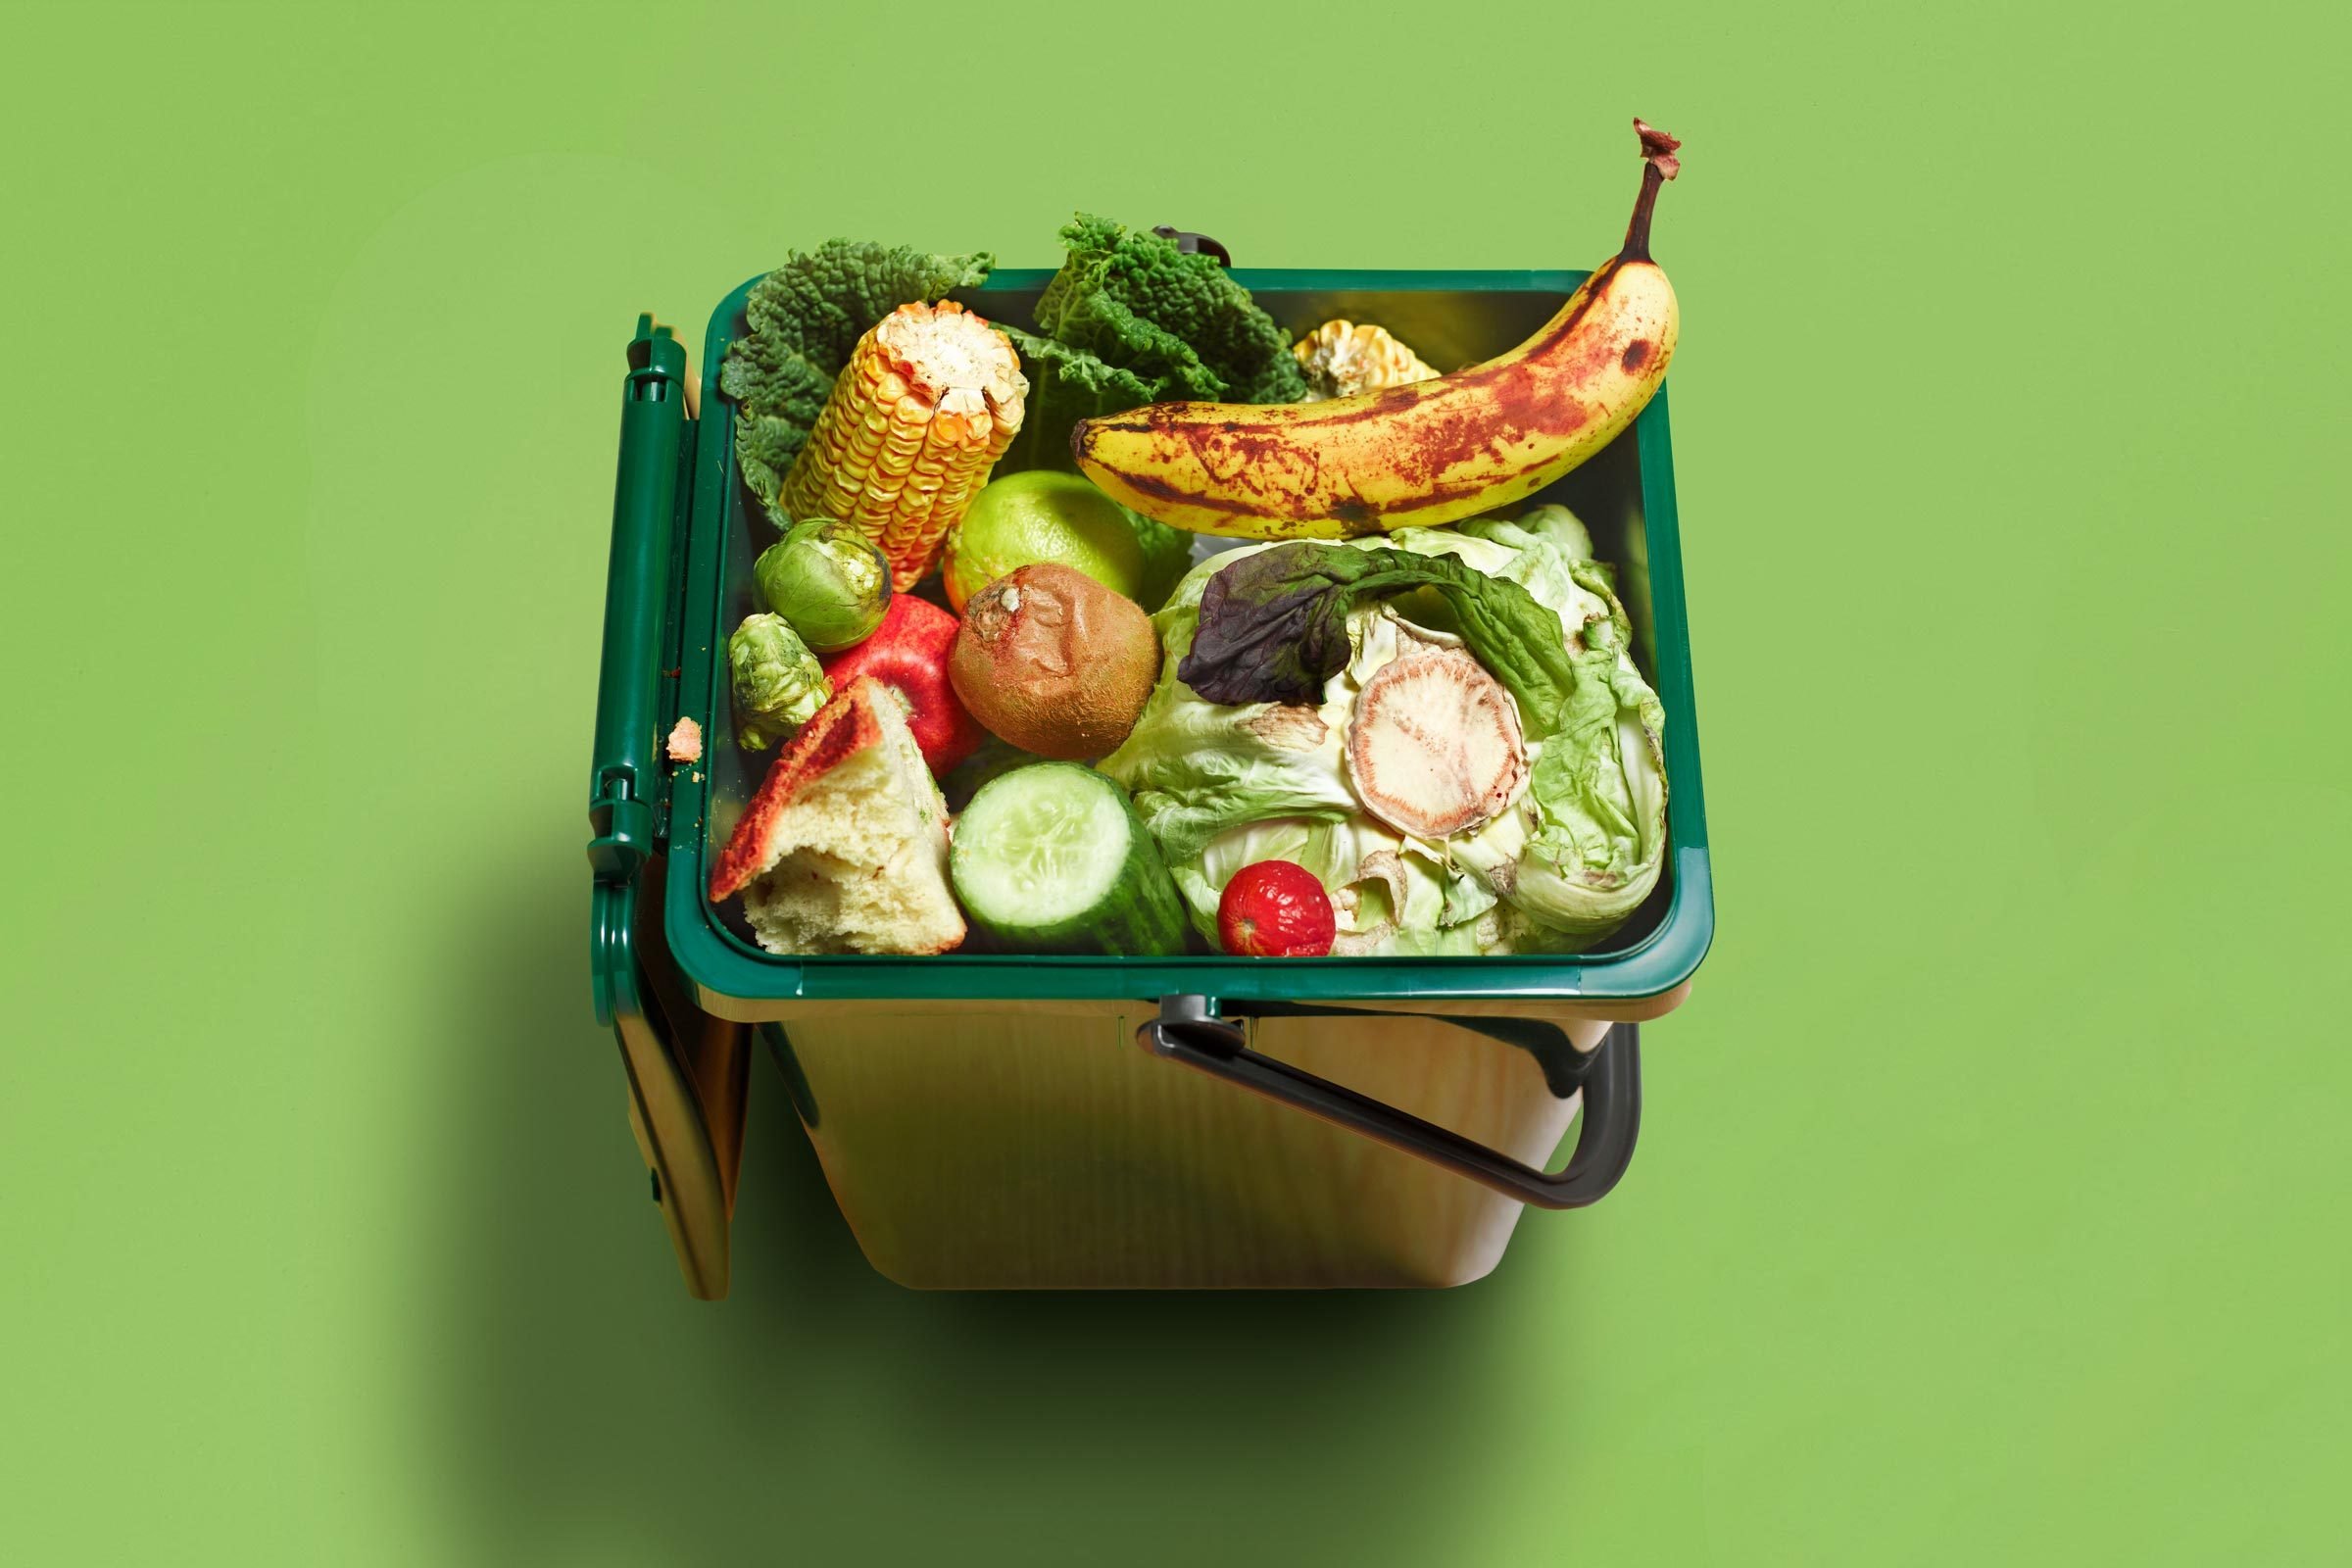 The Best Produce Storage Containers to Reduce Food Waste